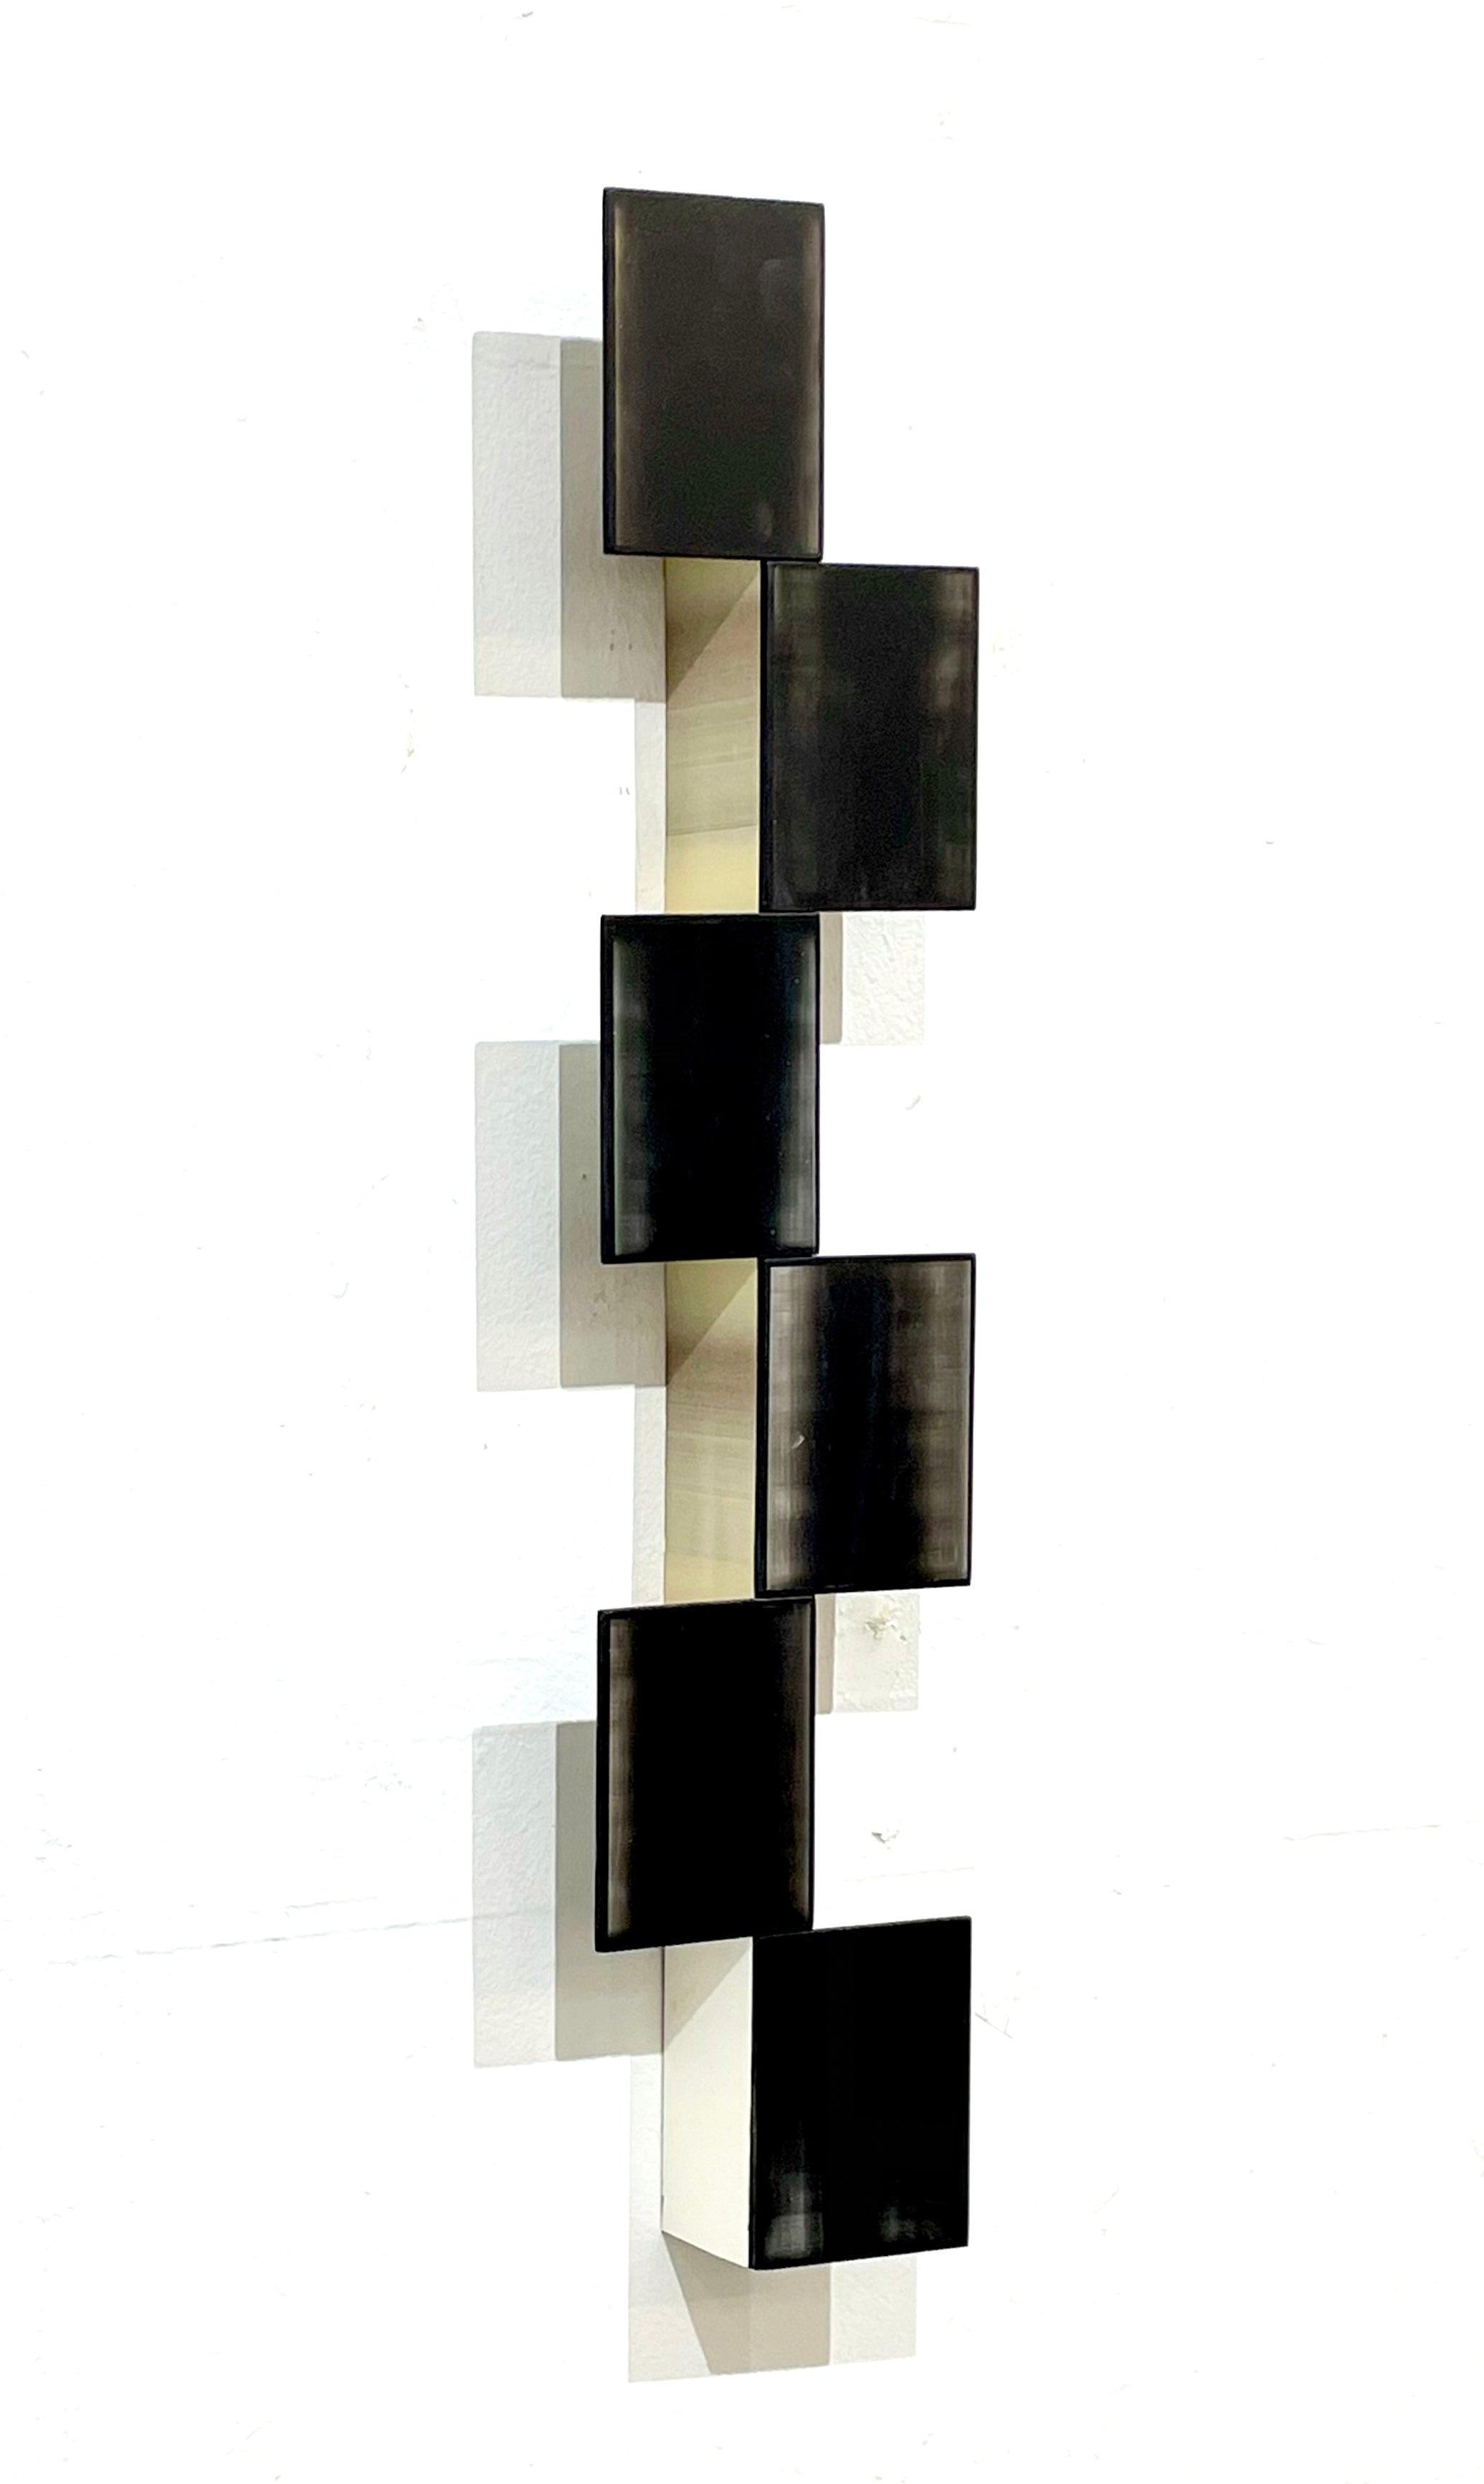 Ben Dallas, Up And Down 3, 2022, 22x5x1.75 in., acrylic medium and paint, board, wood 